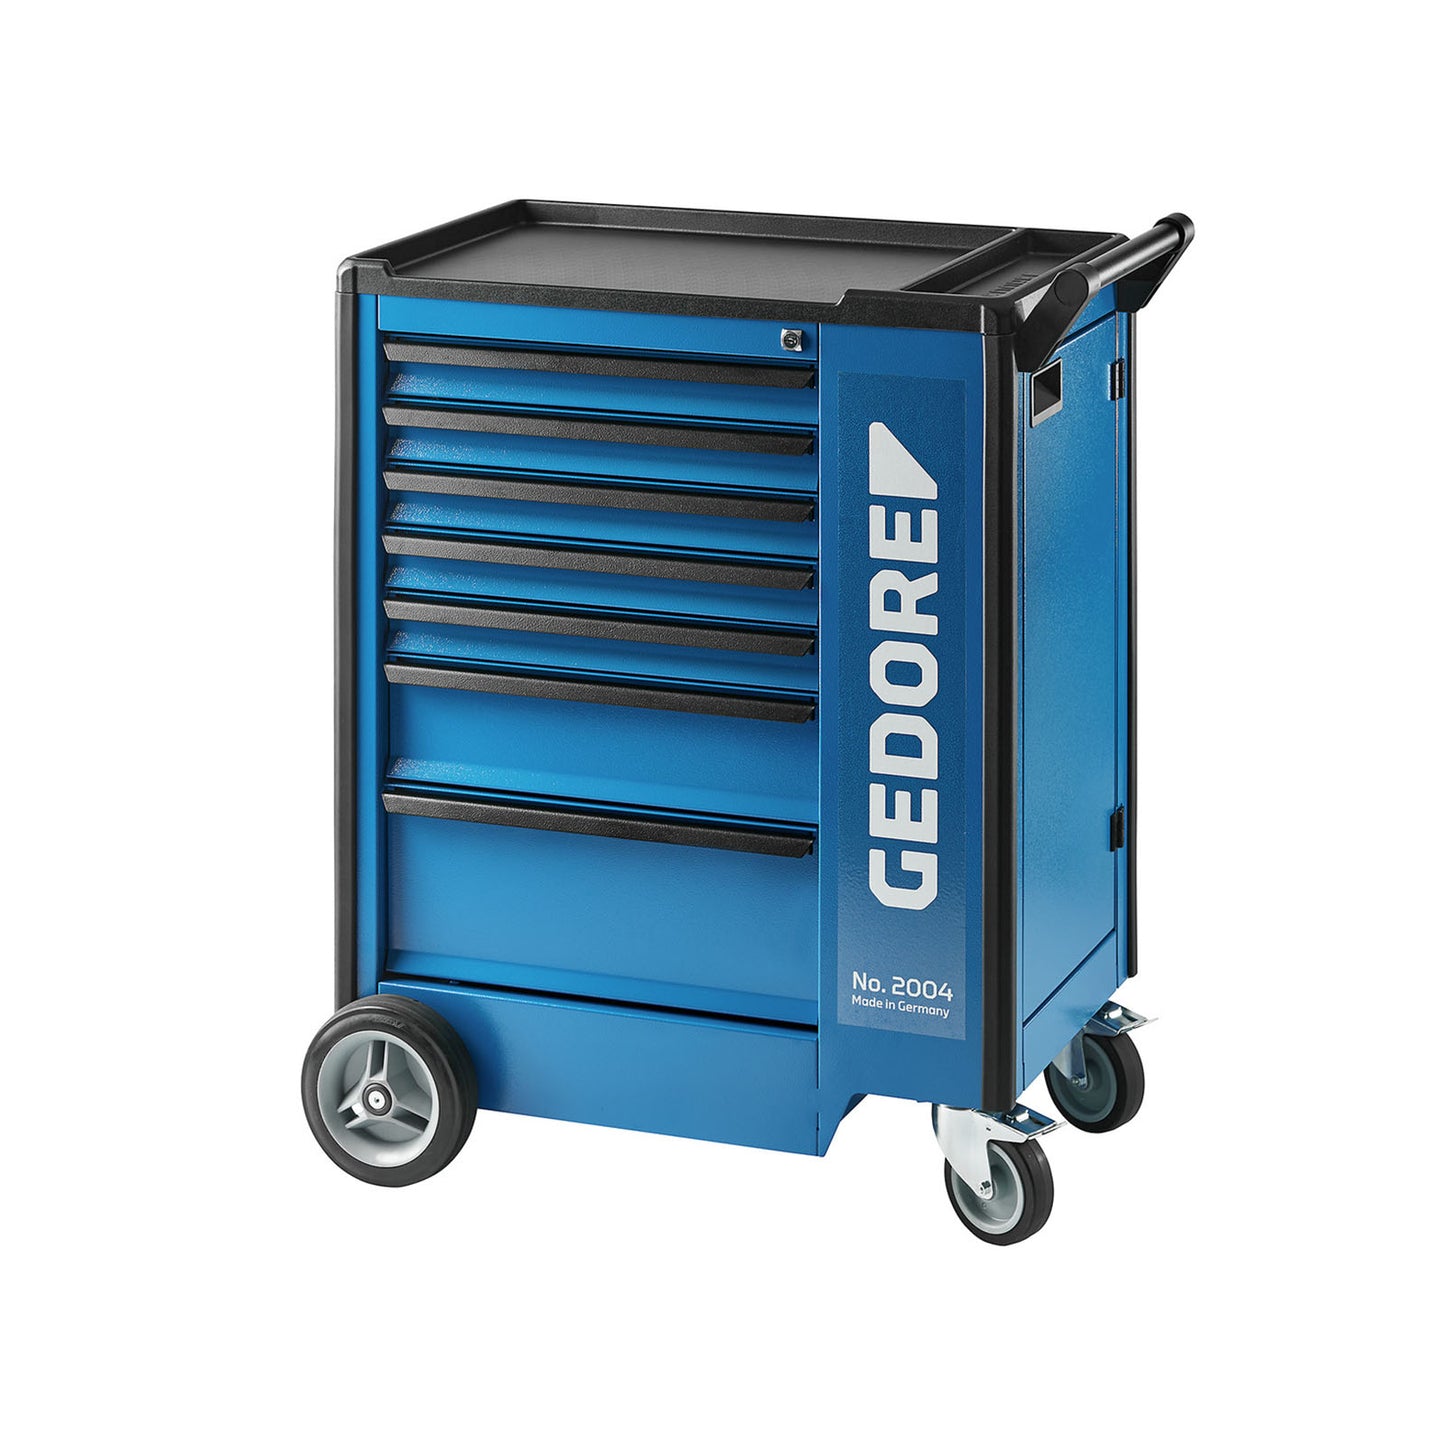 GEDORE 2004 0511 E - Workshop trolley with 7 drawers (2827360)